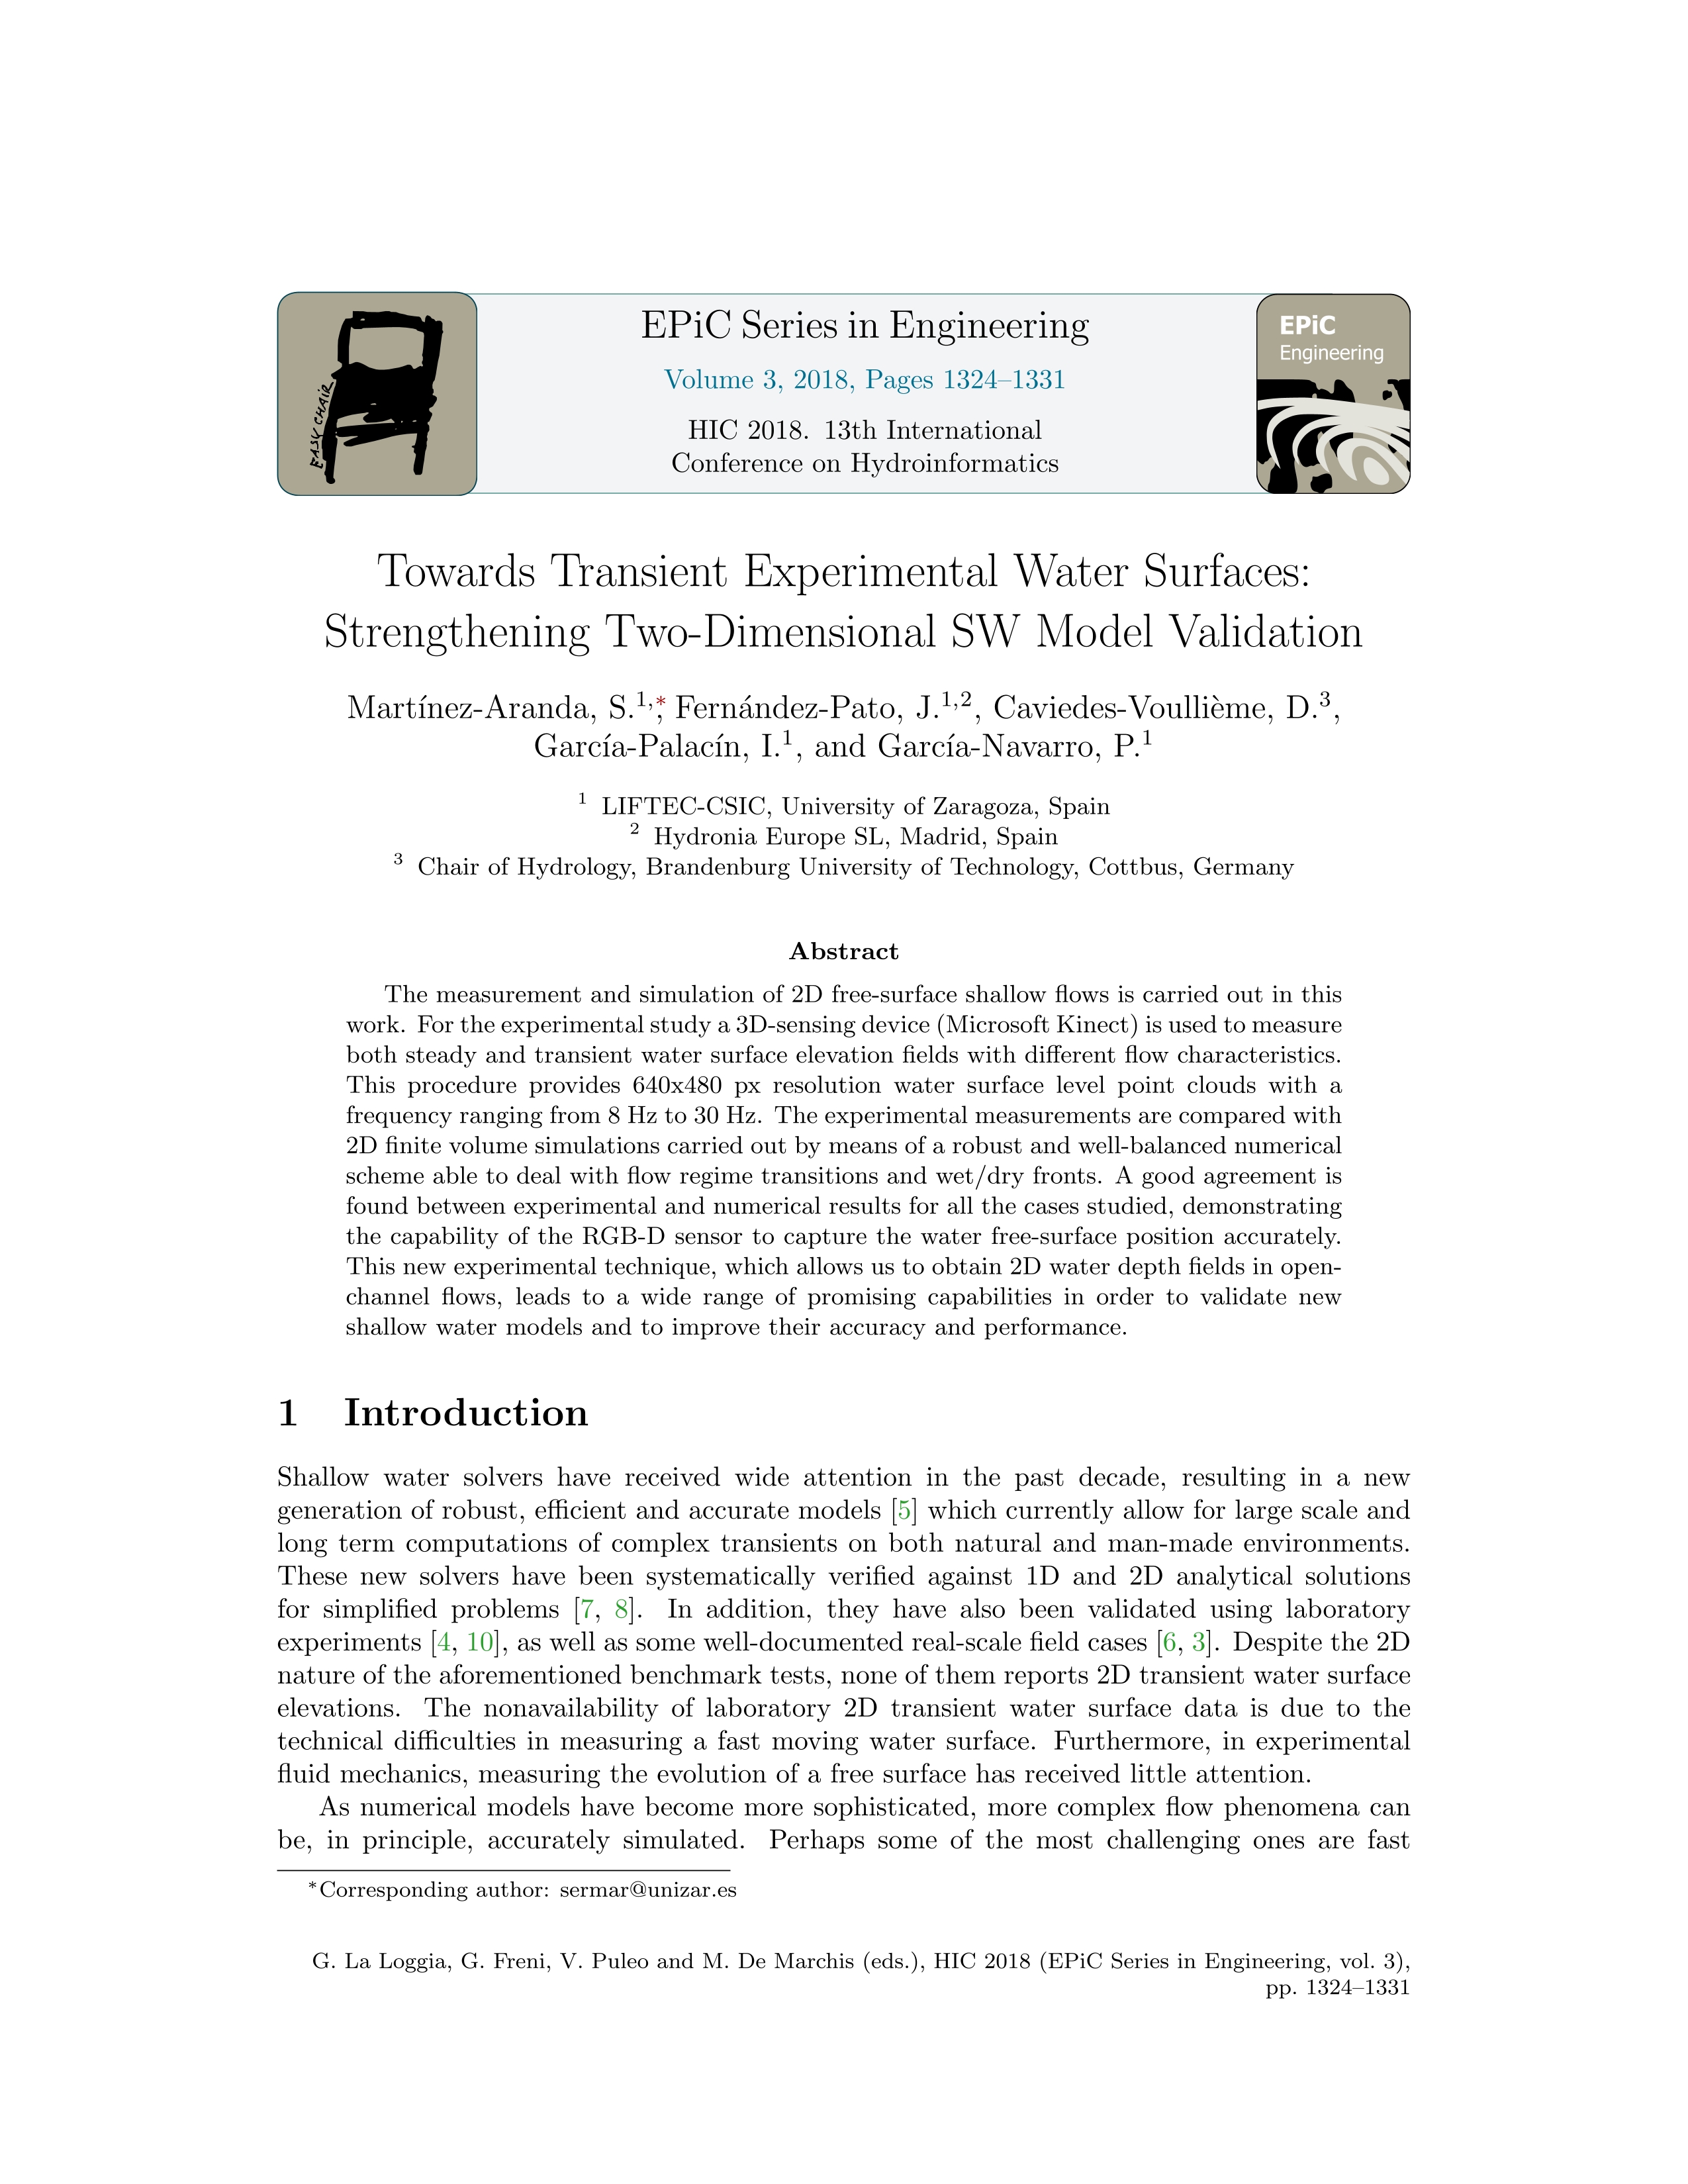 Towards Transient Experimental Water Surfaces: Strengthening Two-Dimensional SW Model Validation